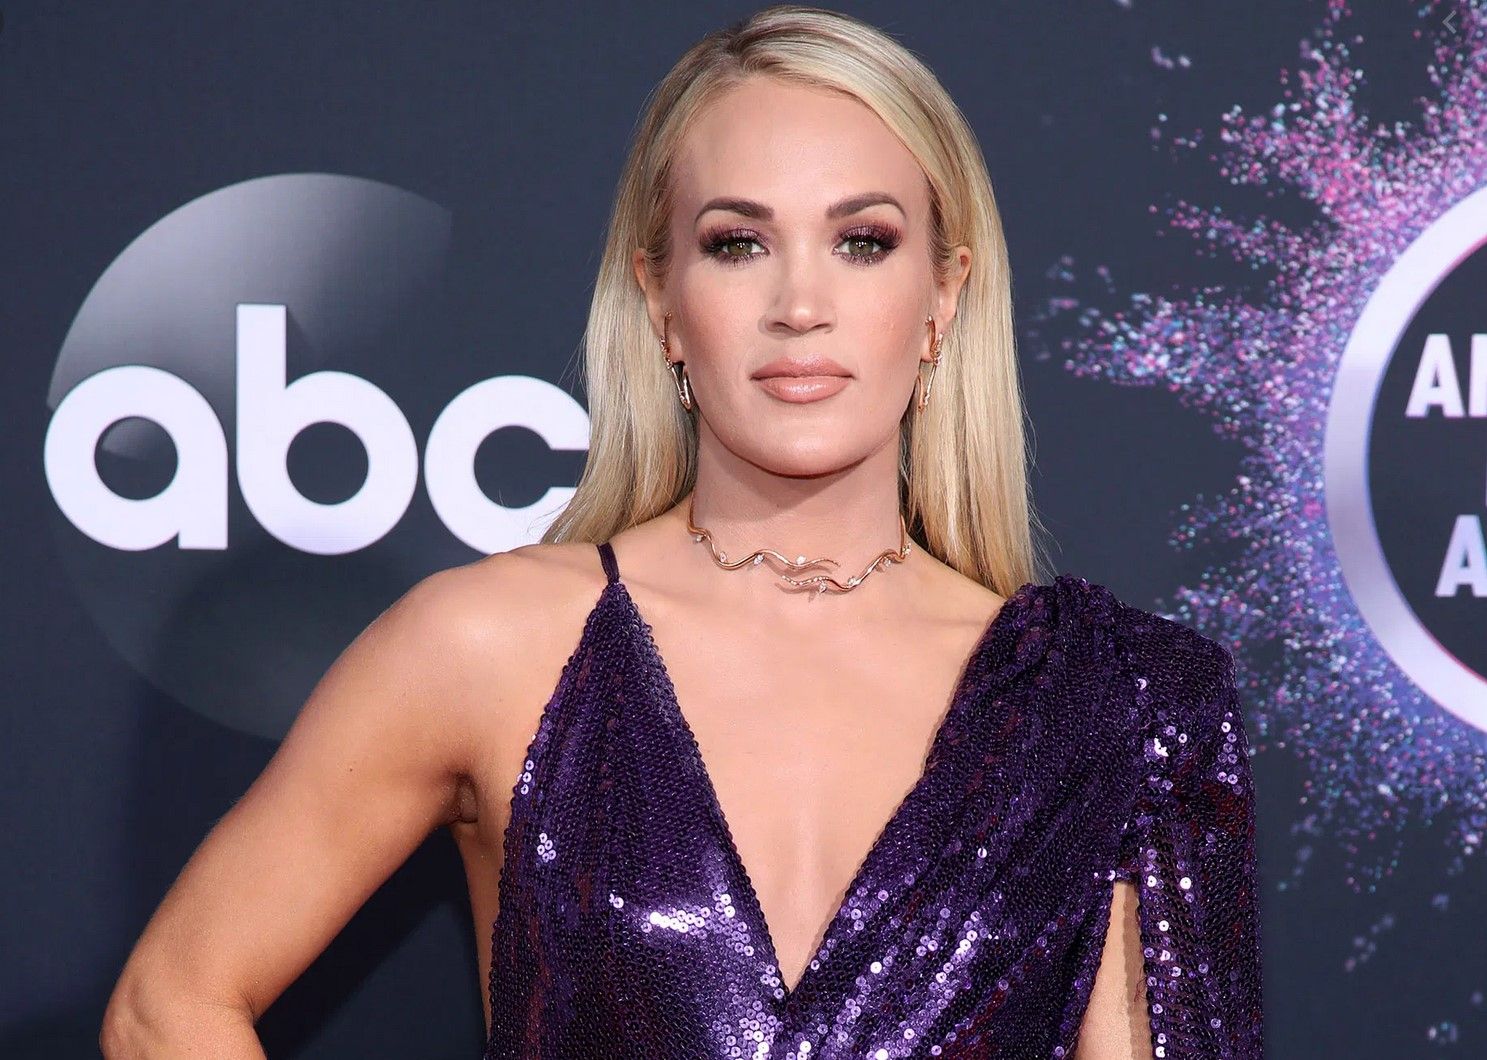 Carrie Underwood wearing a sequined purple gown